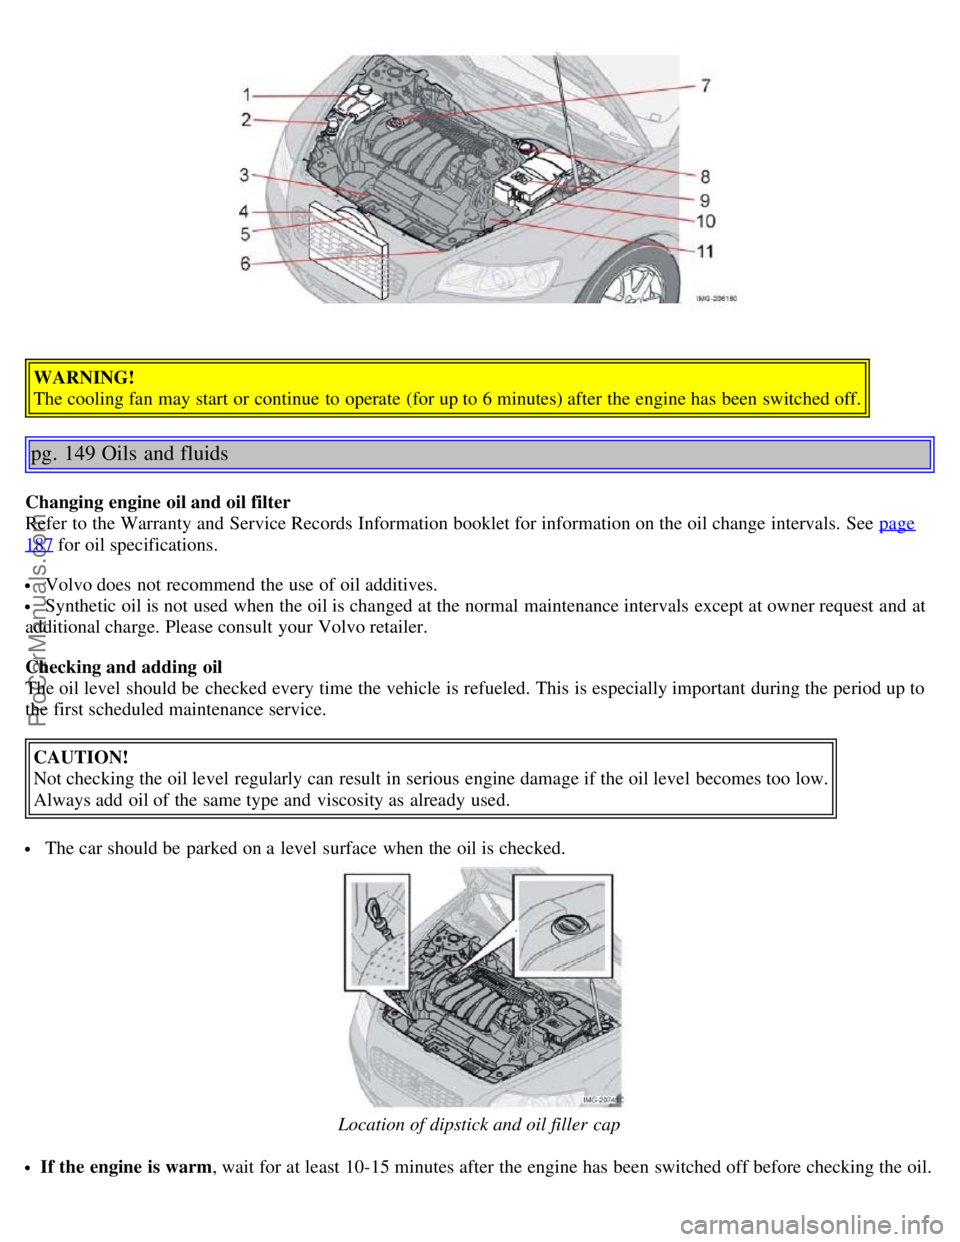 VOLVO S40 2005  Owners Manual WARNING!
The cooling fan may start or continue  to operate  (for up to 6 minutes) after the engine has been switched off.
pg. 149 Oils  and fluids
Changing engine oil and oil filter
Refer to the Warra